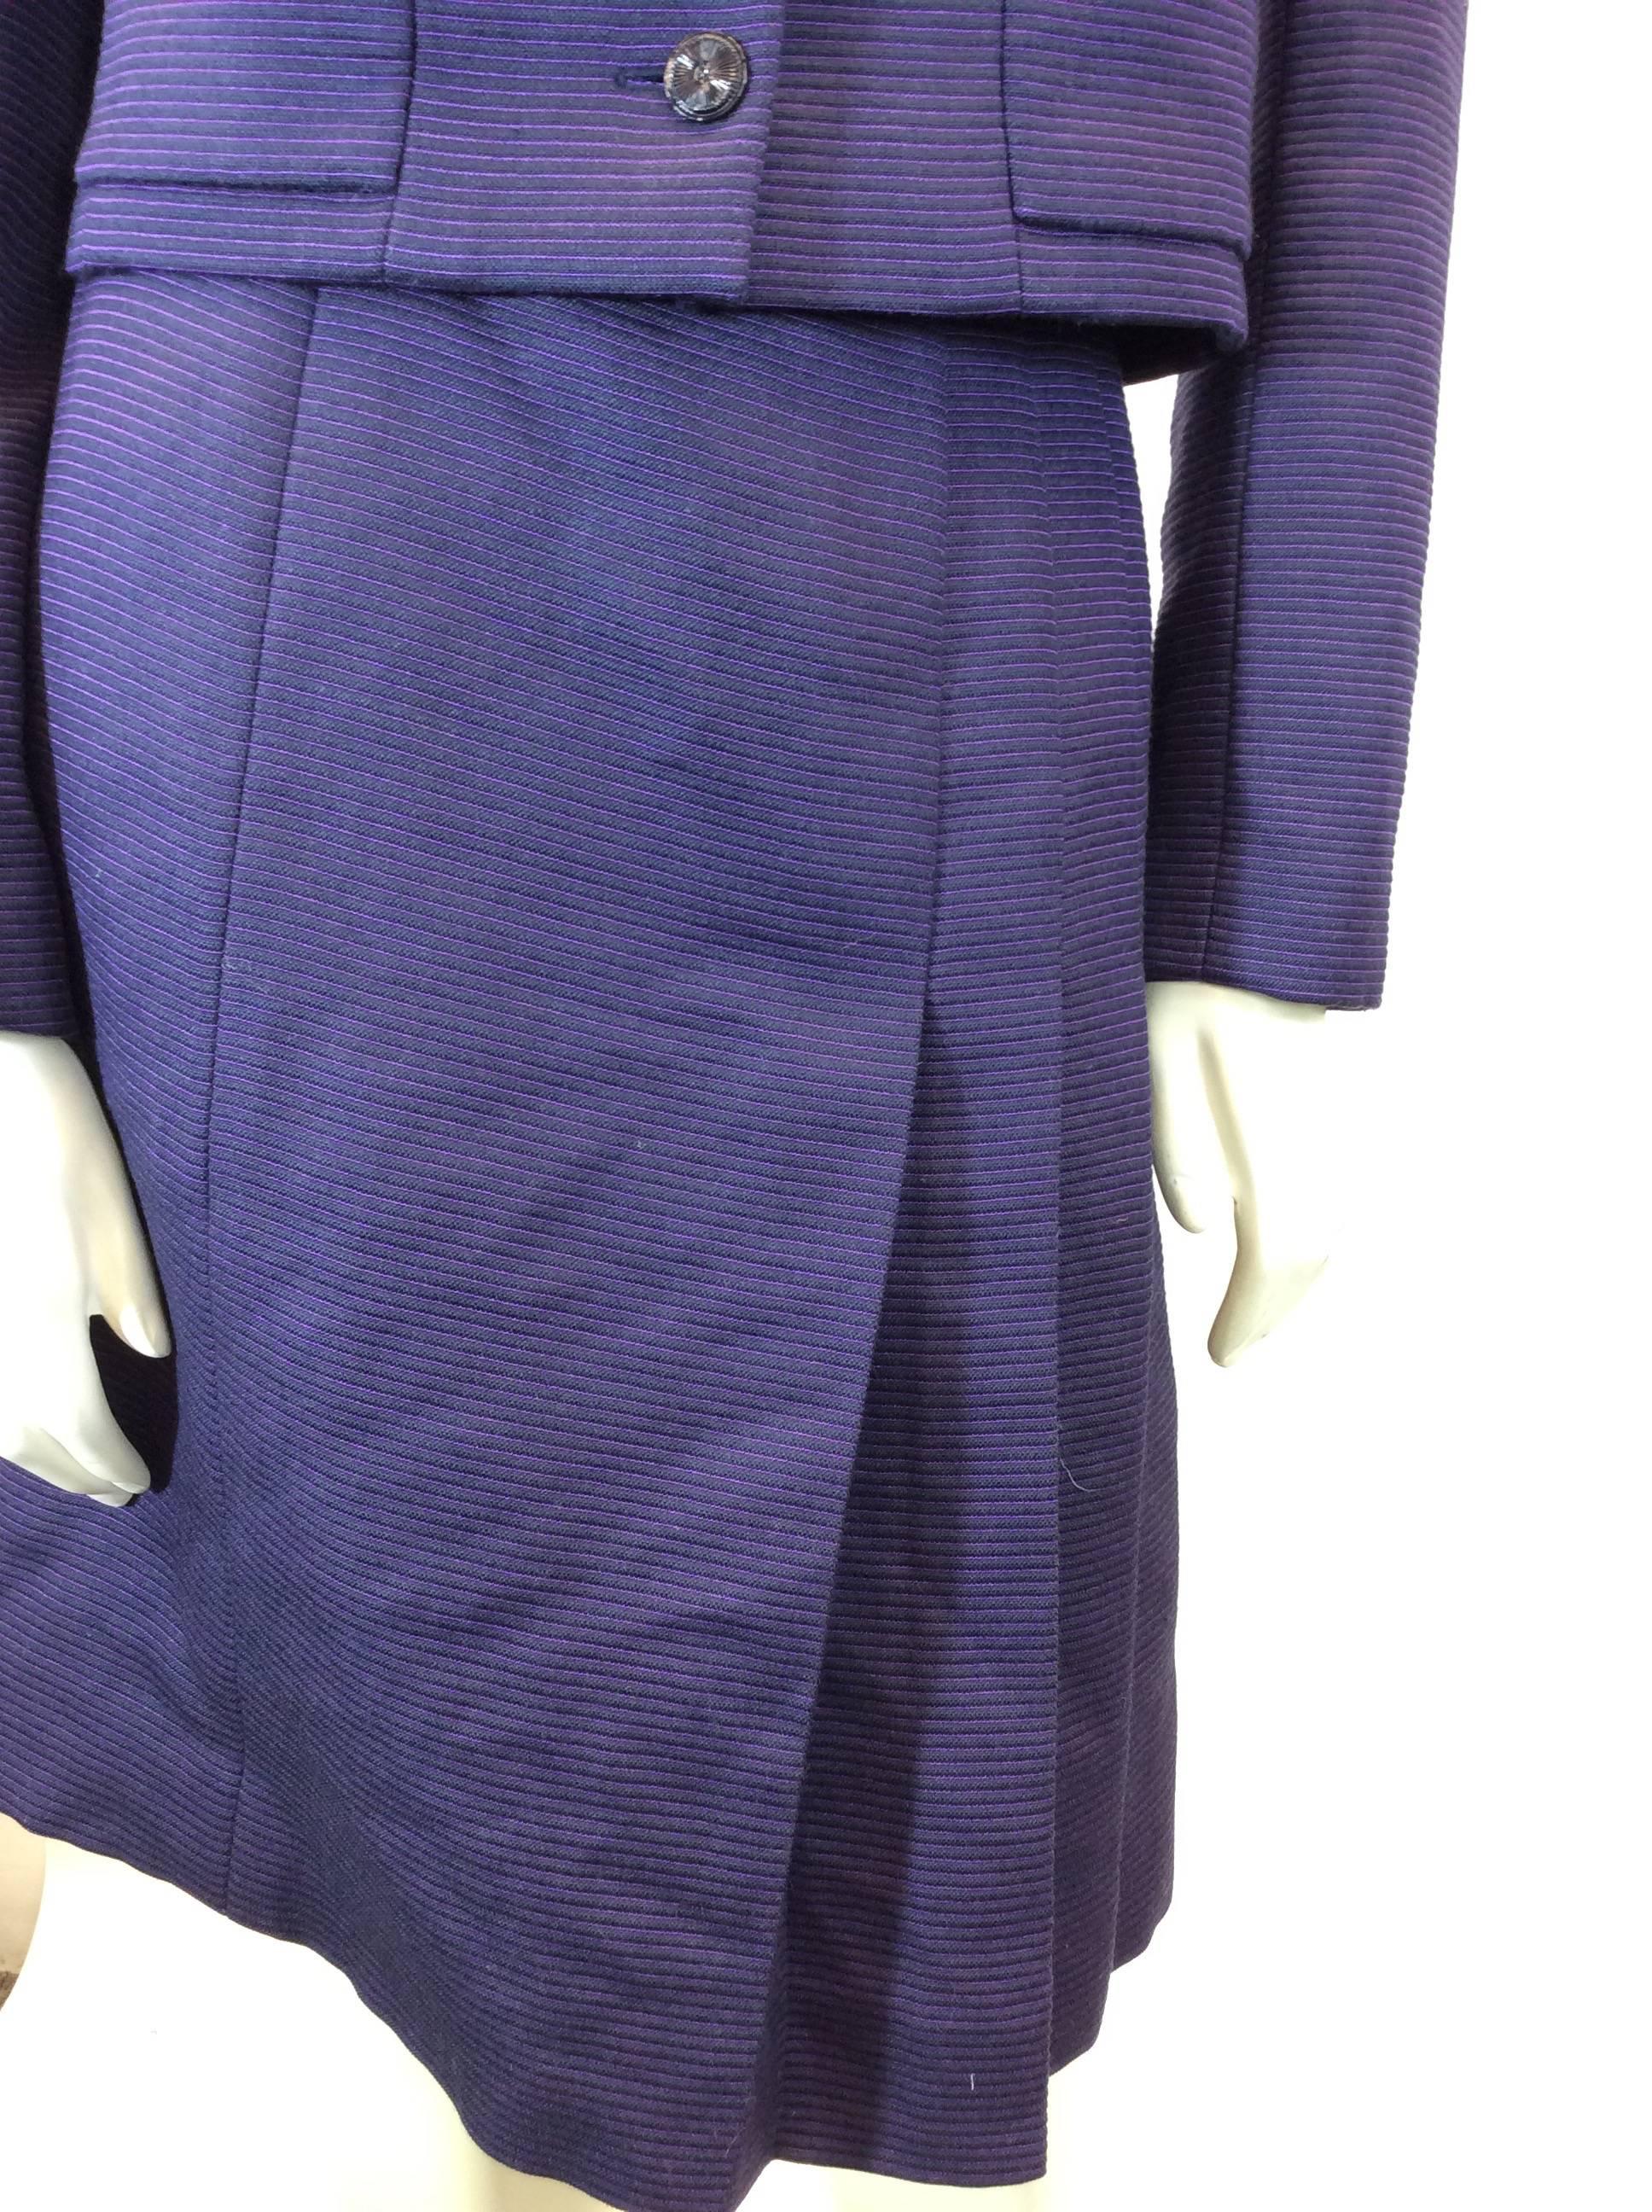 HOLIDAY FLASH SALE! 50% Off! Chanel Two Piece Purple Skirt Suit Set 3